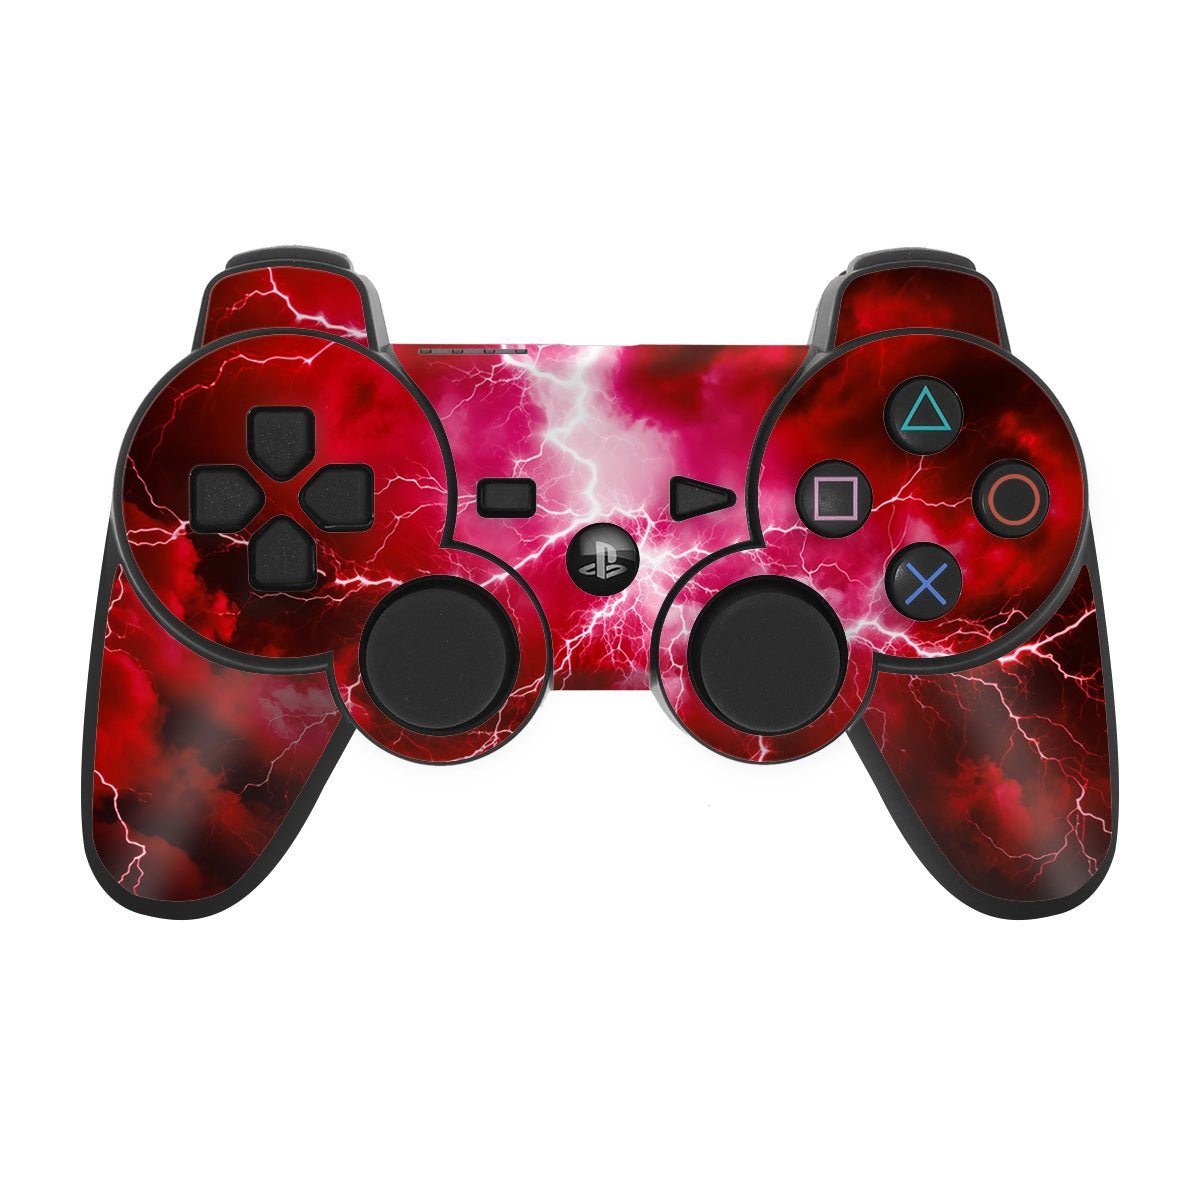 Apocalypse Red - Sony PS3 Controller Skin - Gaming - DecalGirl